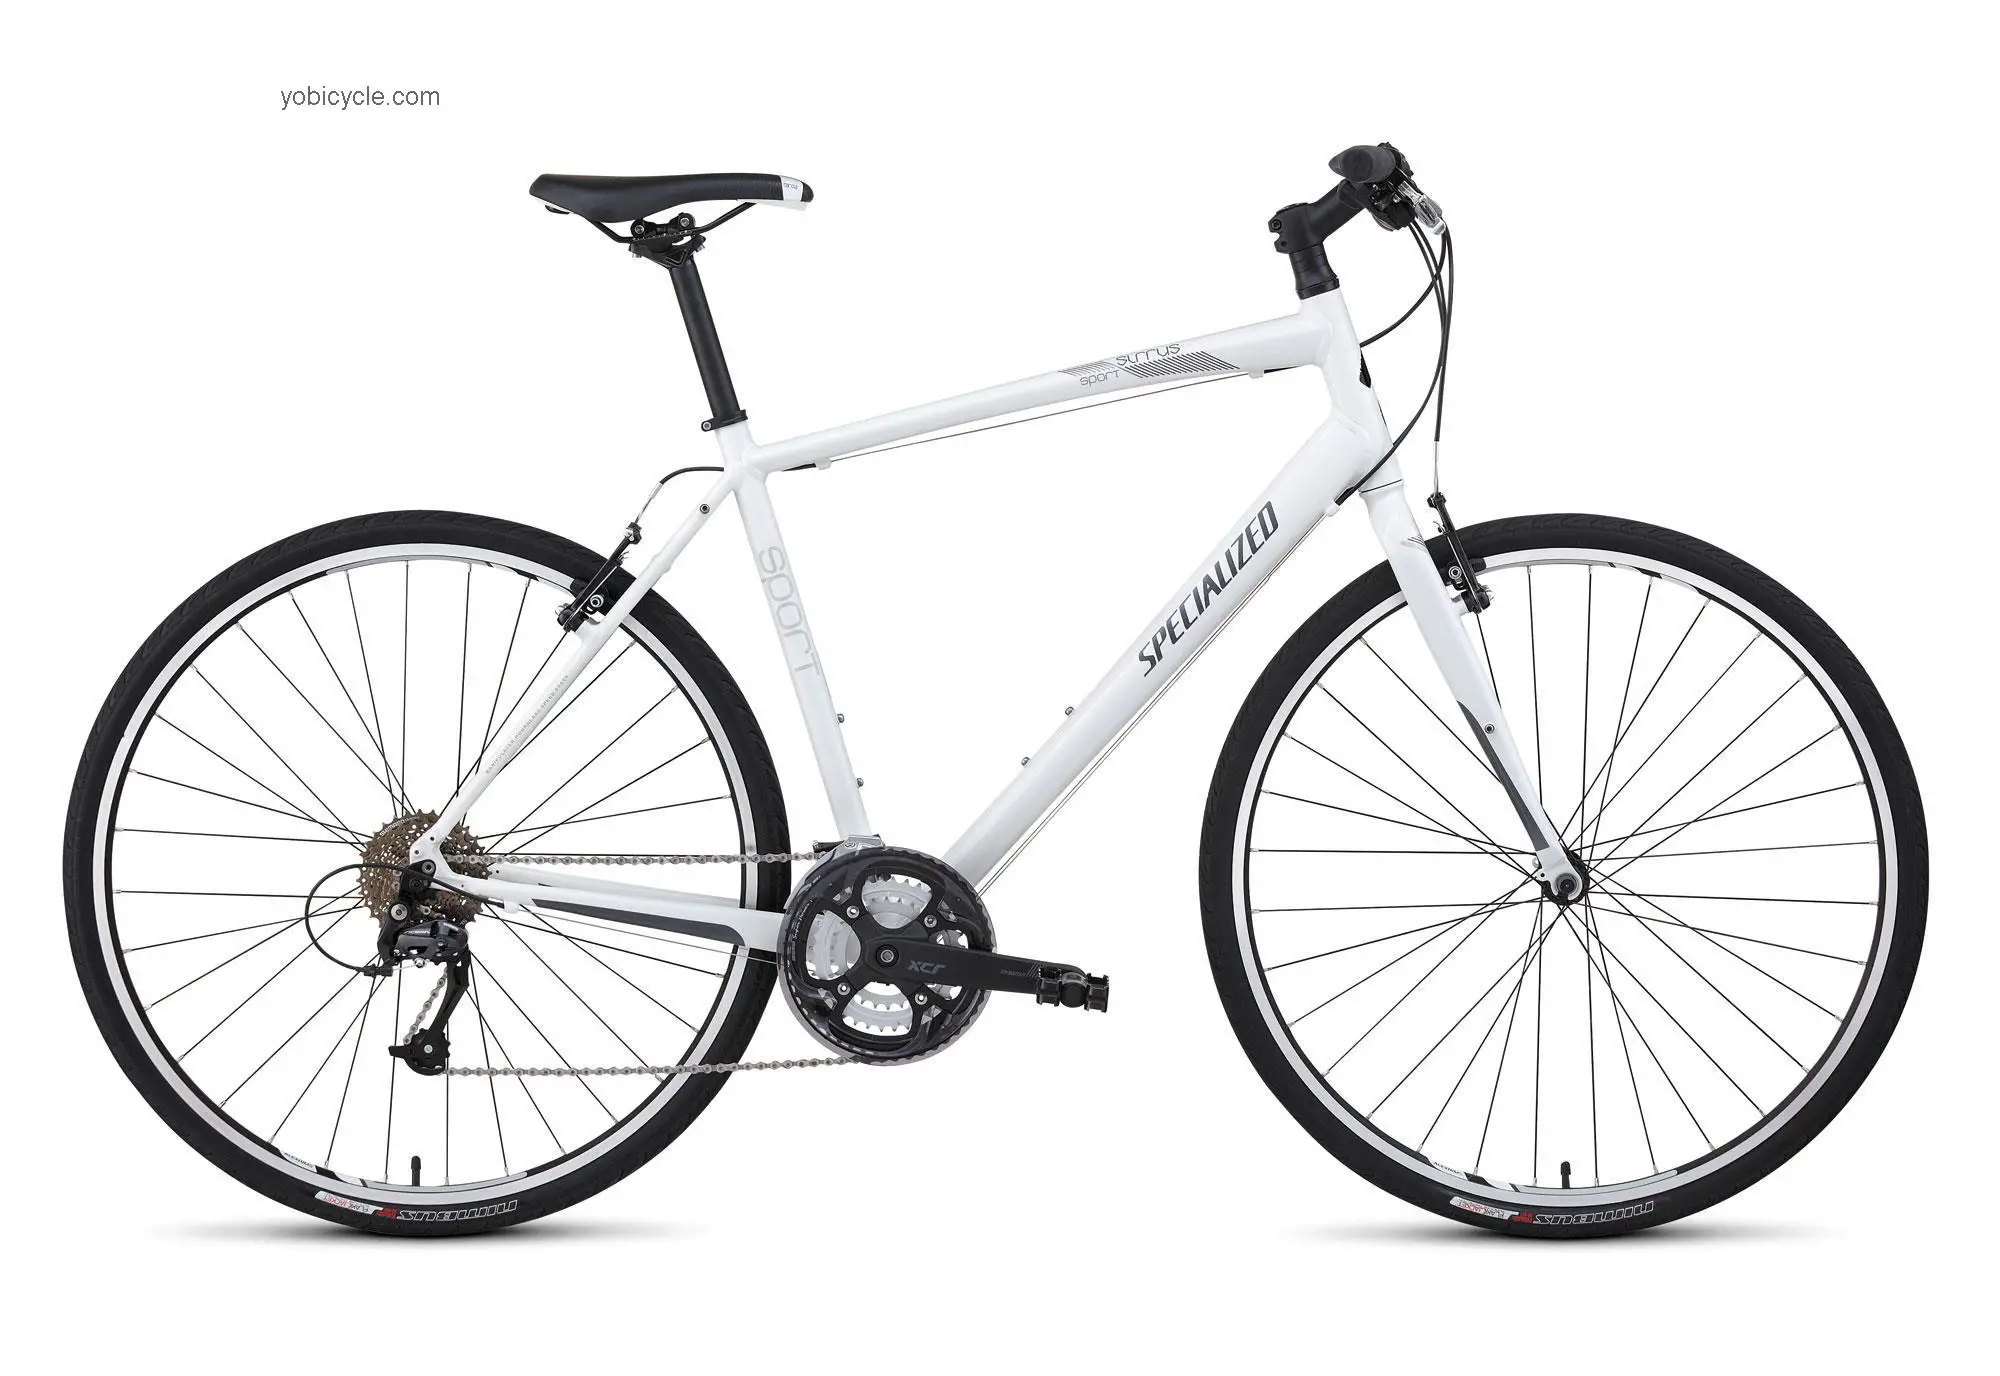 Specialized Sirrus Sport 2012 comparison online with competitors